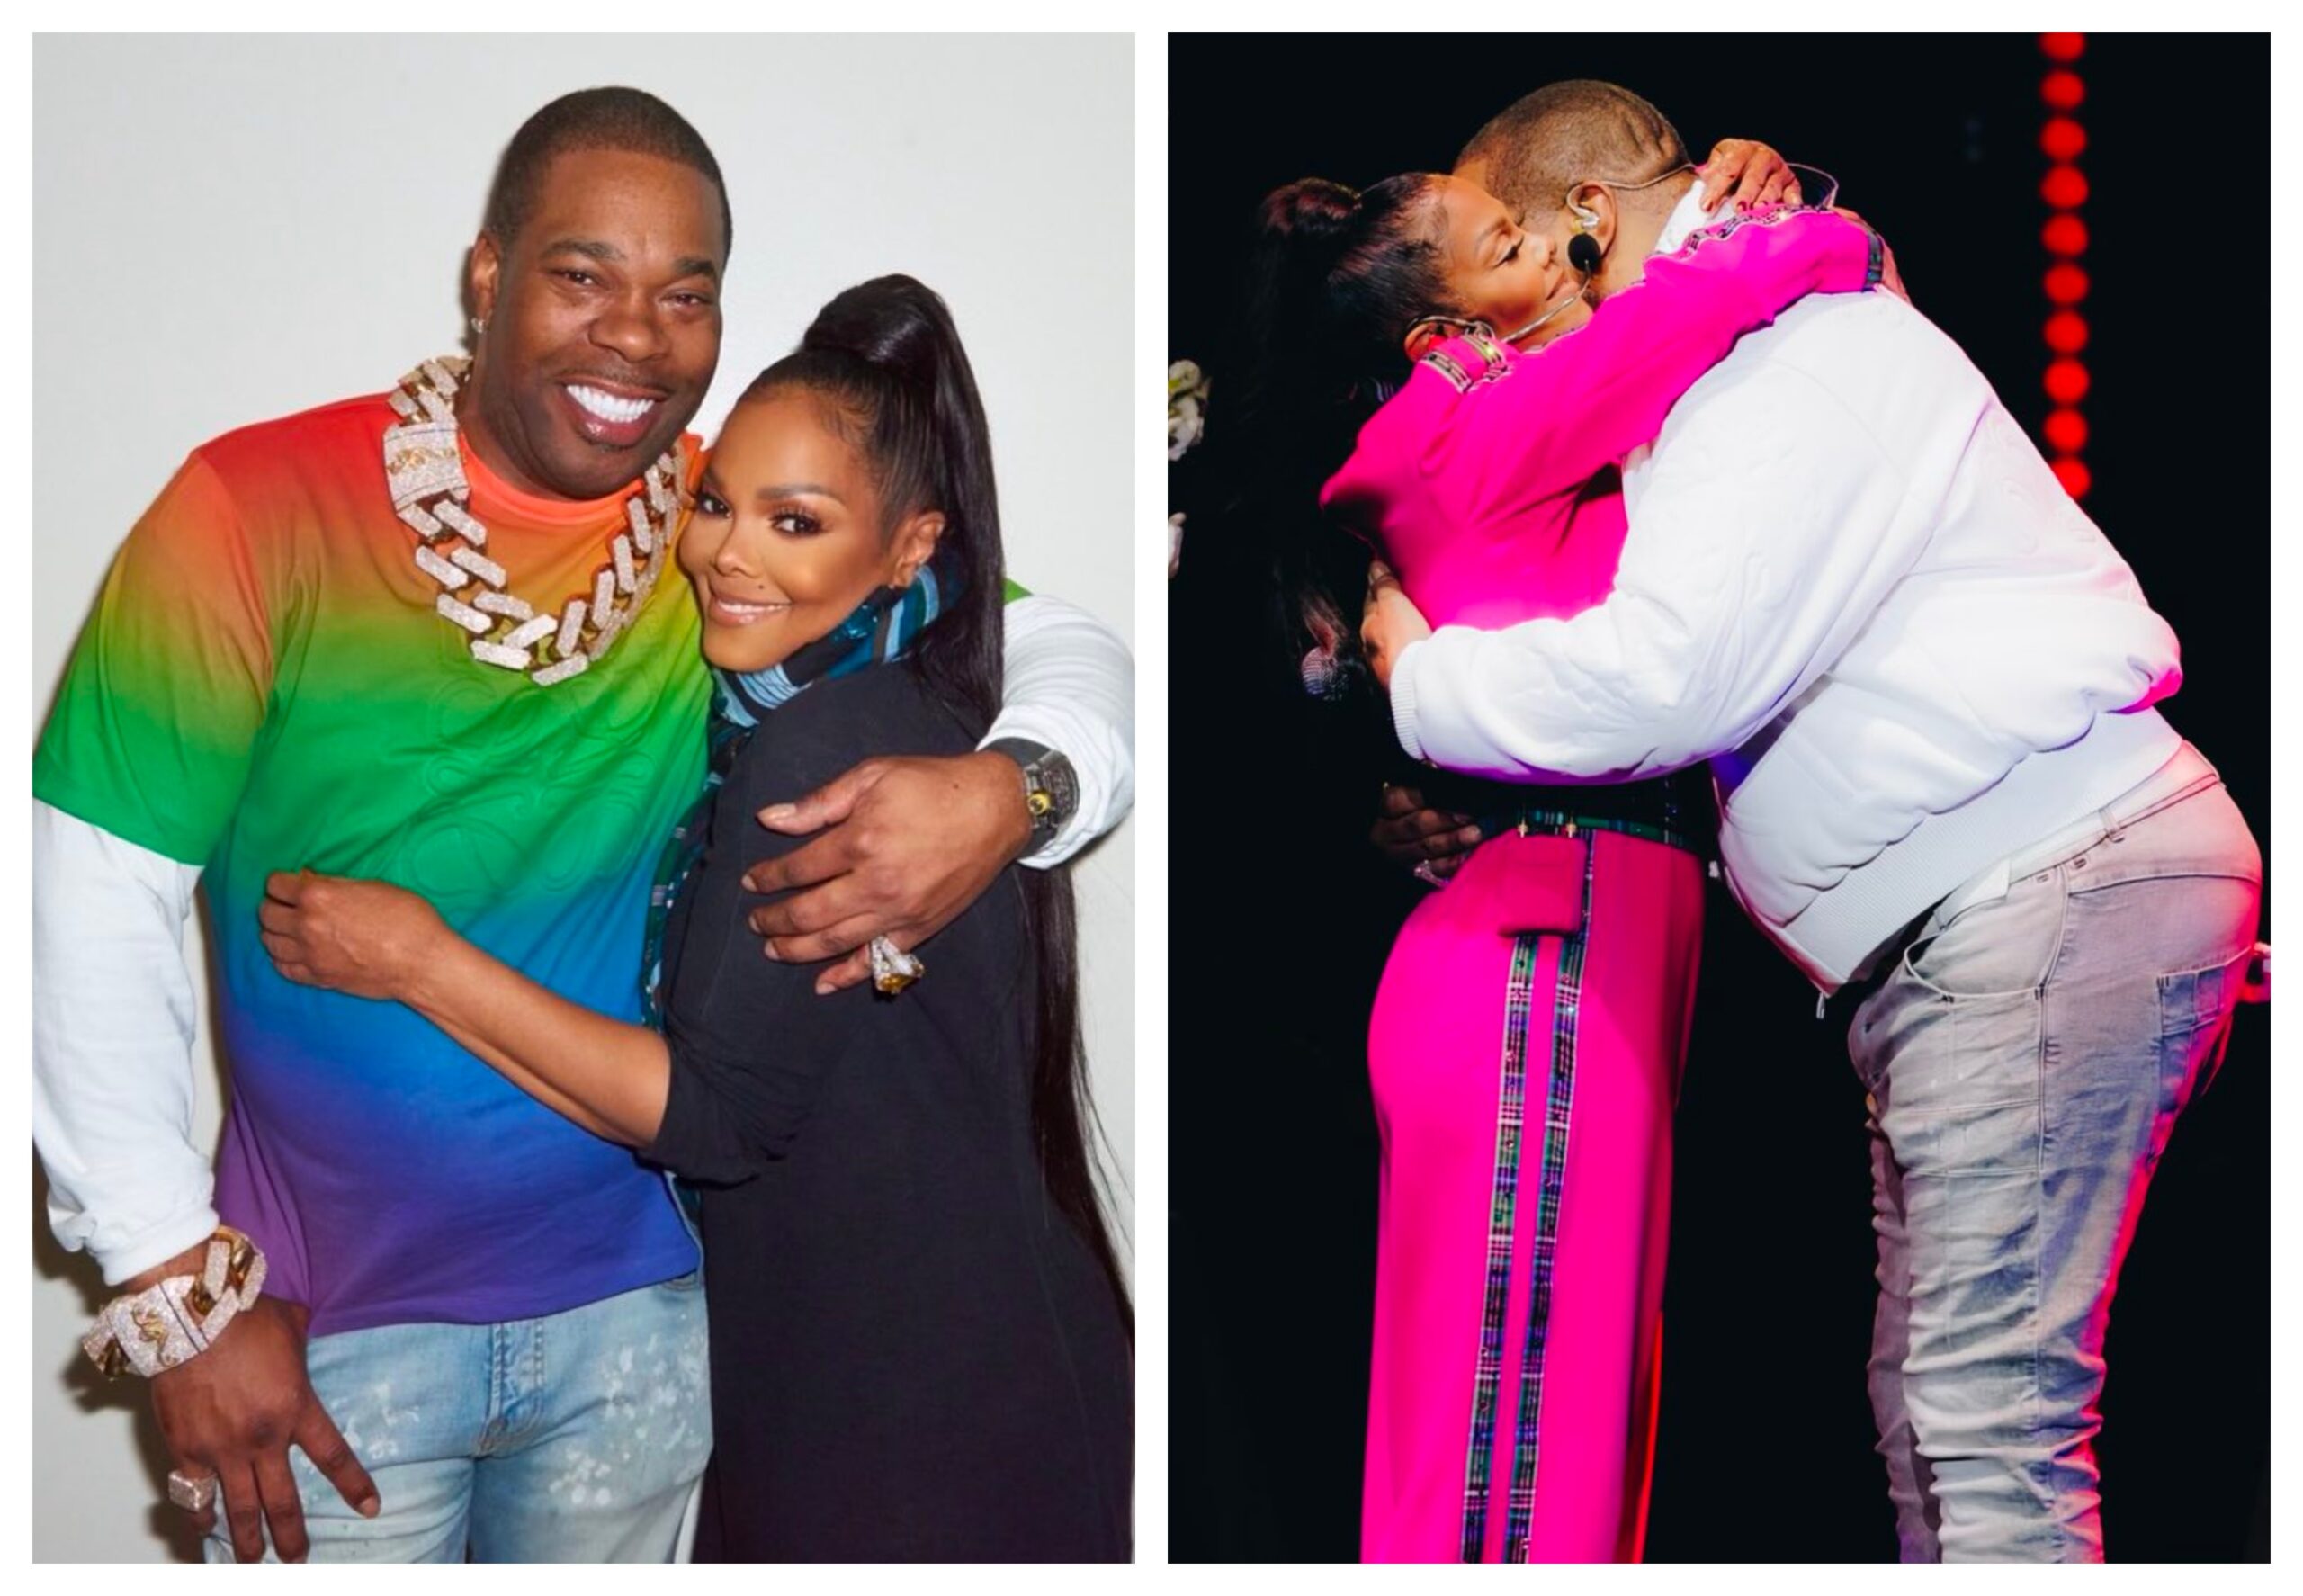 Janet Jackson & Busta Rhymes SURPRISE with ‘What’s It Gonna Be?’ Performance at ‘Together Again Tour’ in NYC